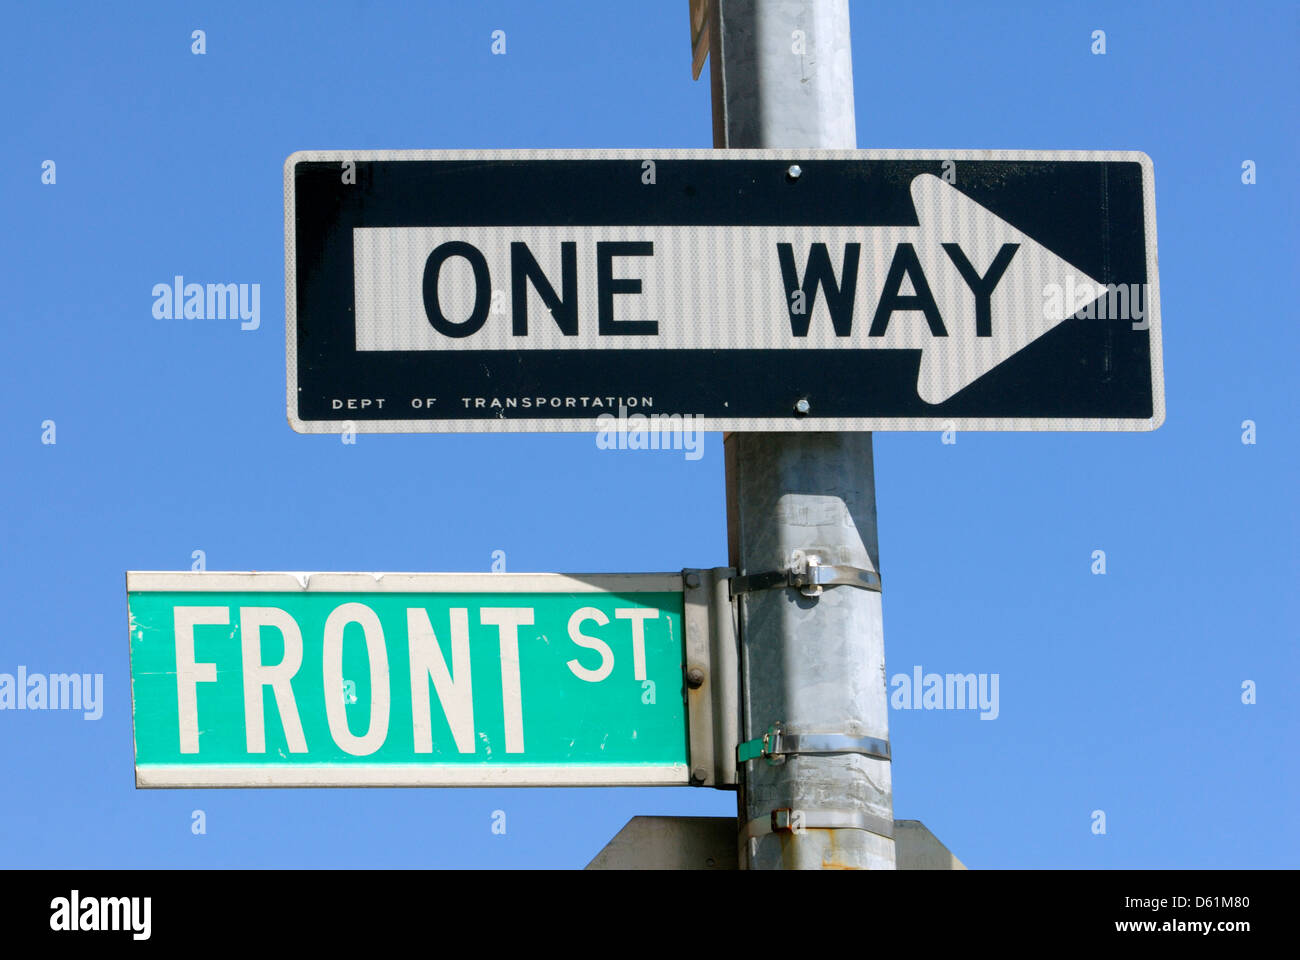 One way, Front St., street signs in New York City, New York, USA Stock Photo